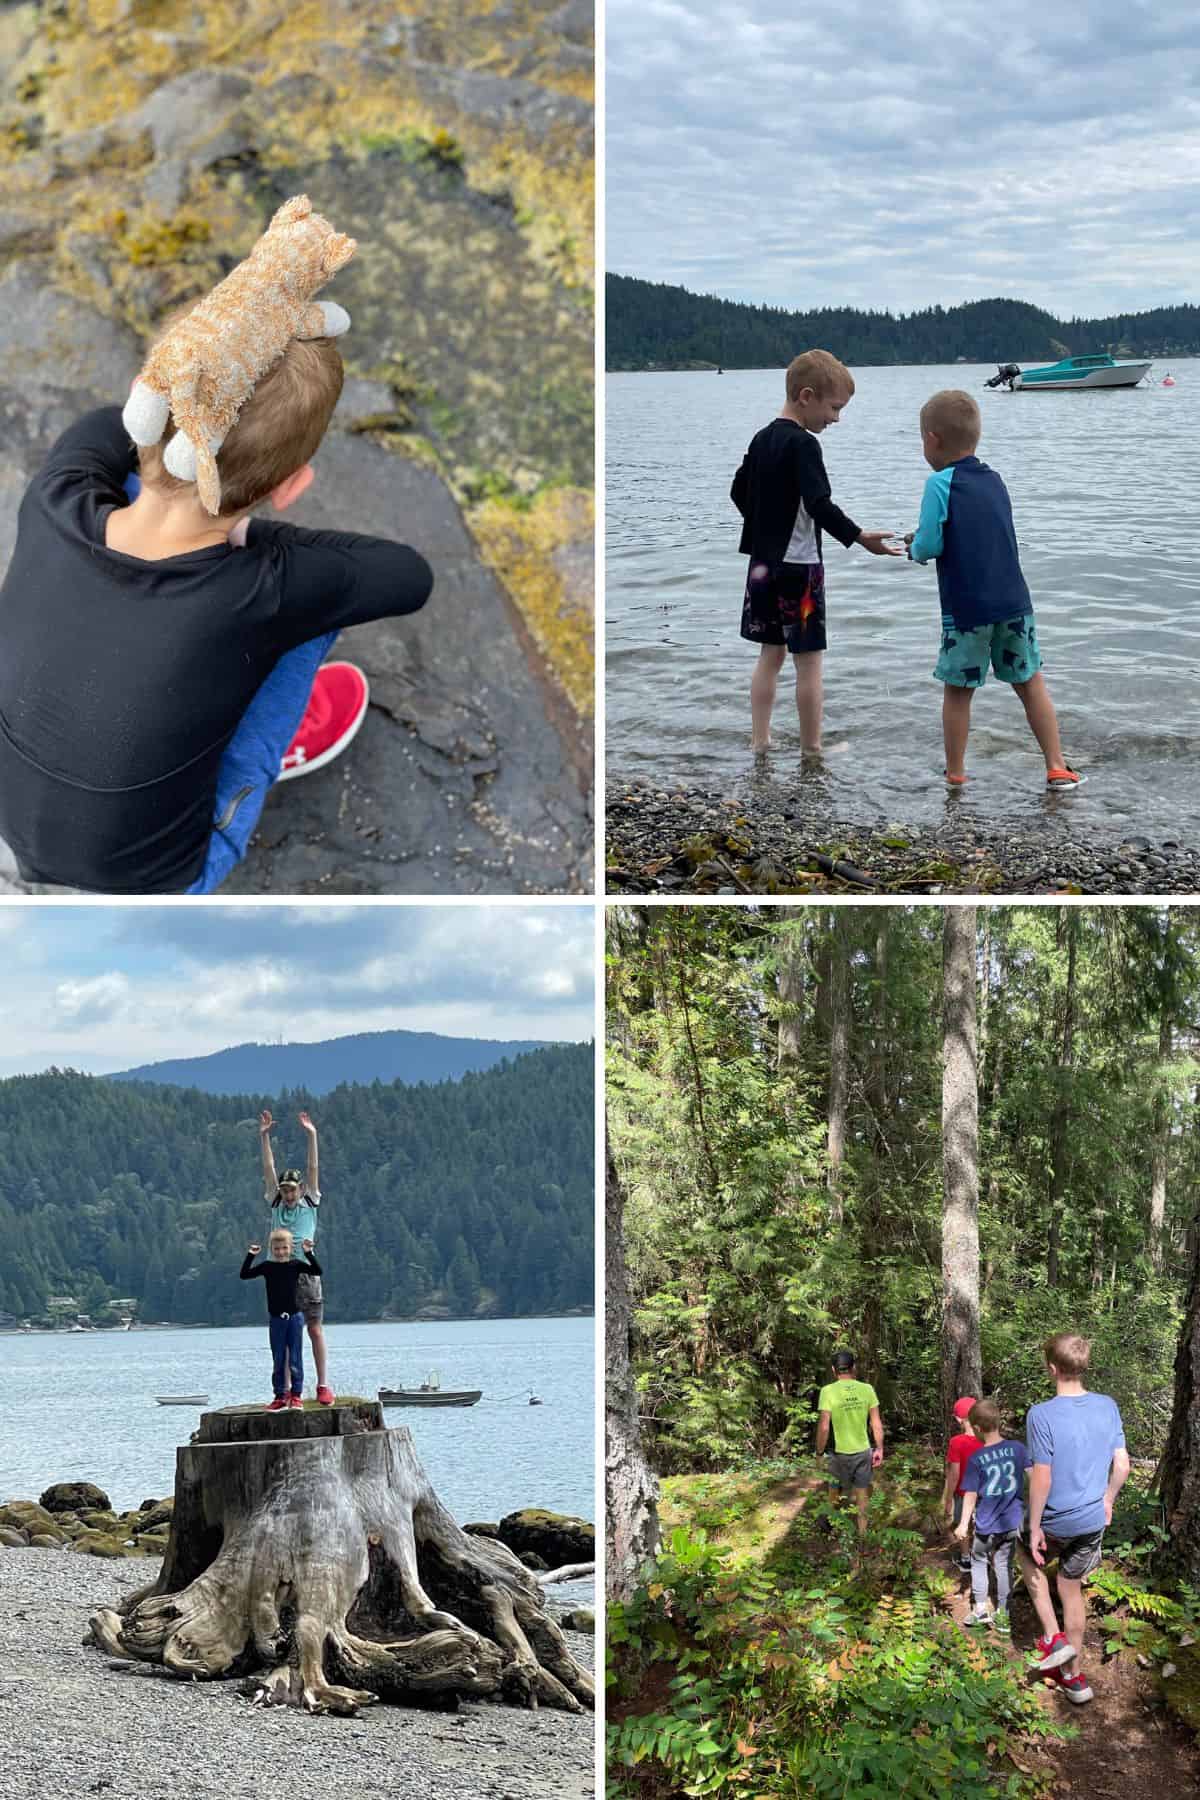 4 photos of kids on vacation